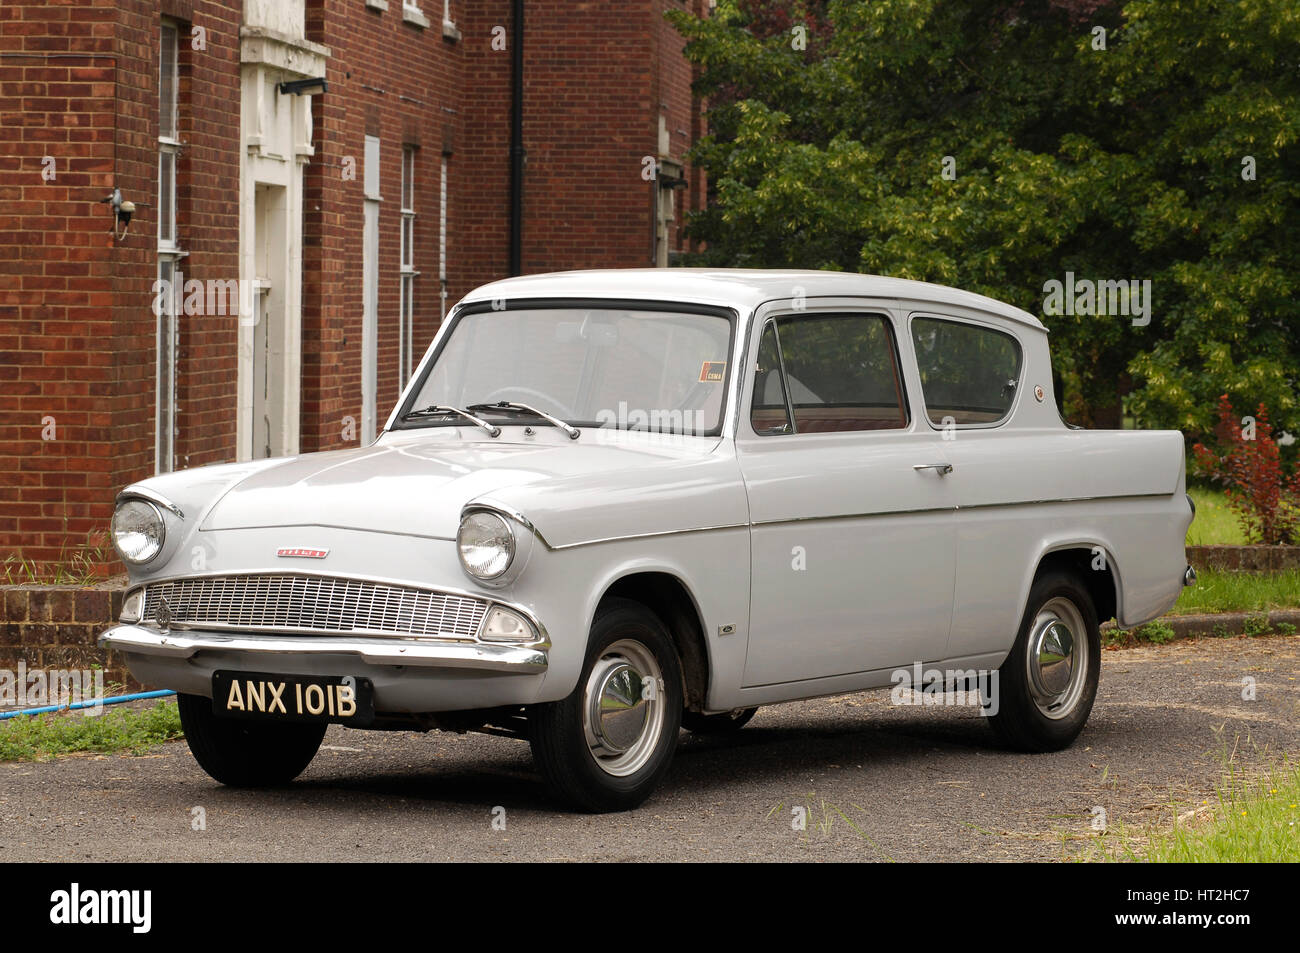 1964 Ford Anglia Deluxe : Artiste inconnu. Banque D'Images